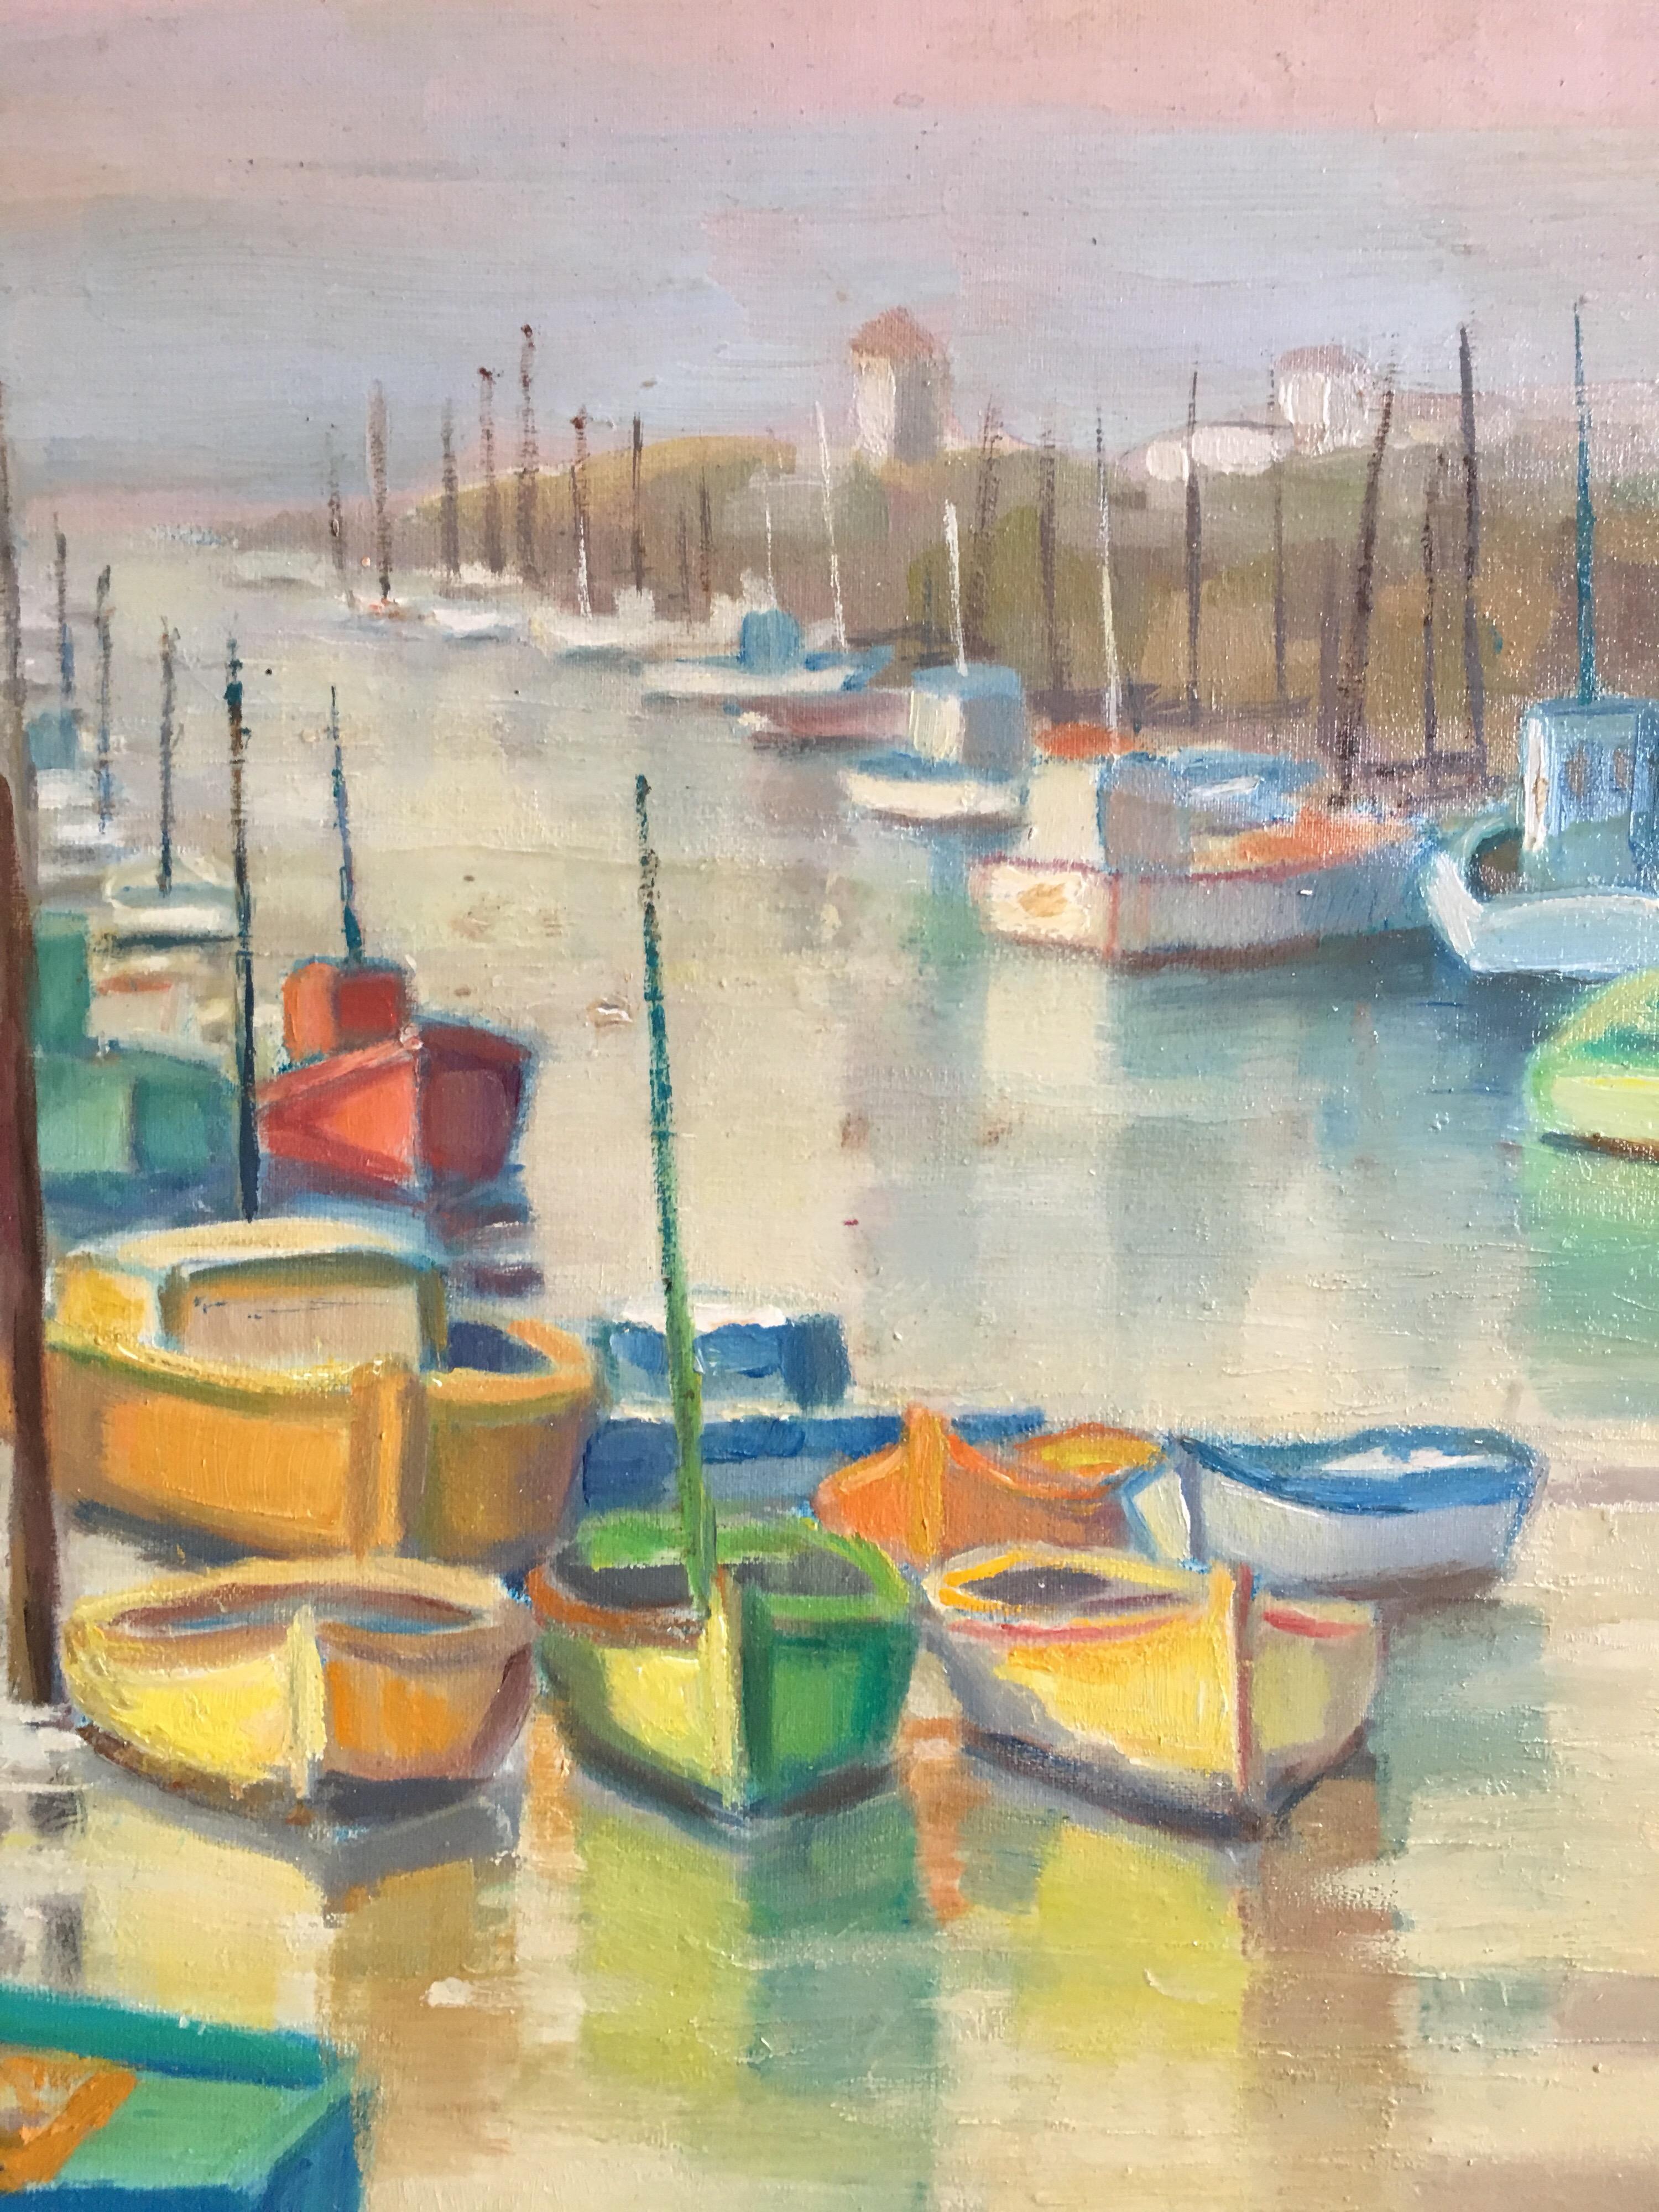 Fishing Boats on a French Mooring, Signed Oil Painting 
By French artist, Suzette Mezie, Mid 20th Century
Signed by the artist on the lower right hand corner
Oil painting on board, framed
Framed size: 22 x 26.5 inches

Beautiful scenic landscape of